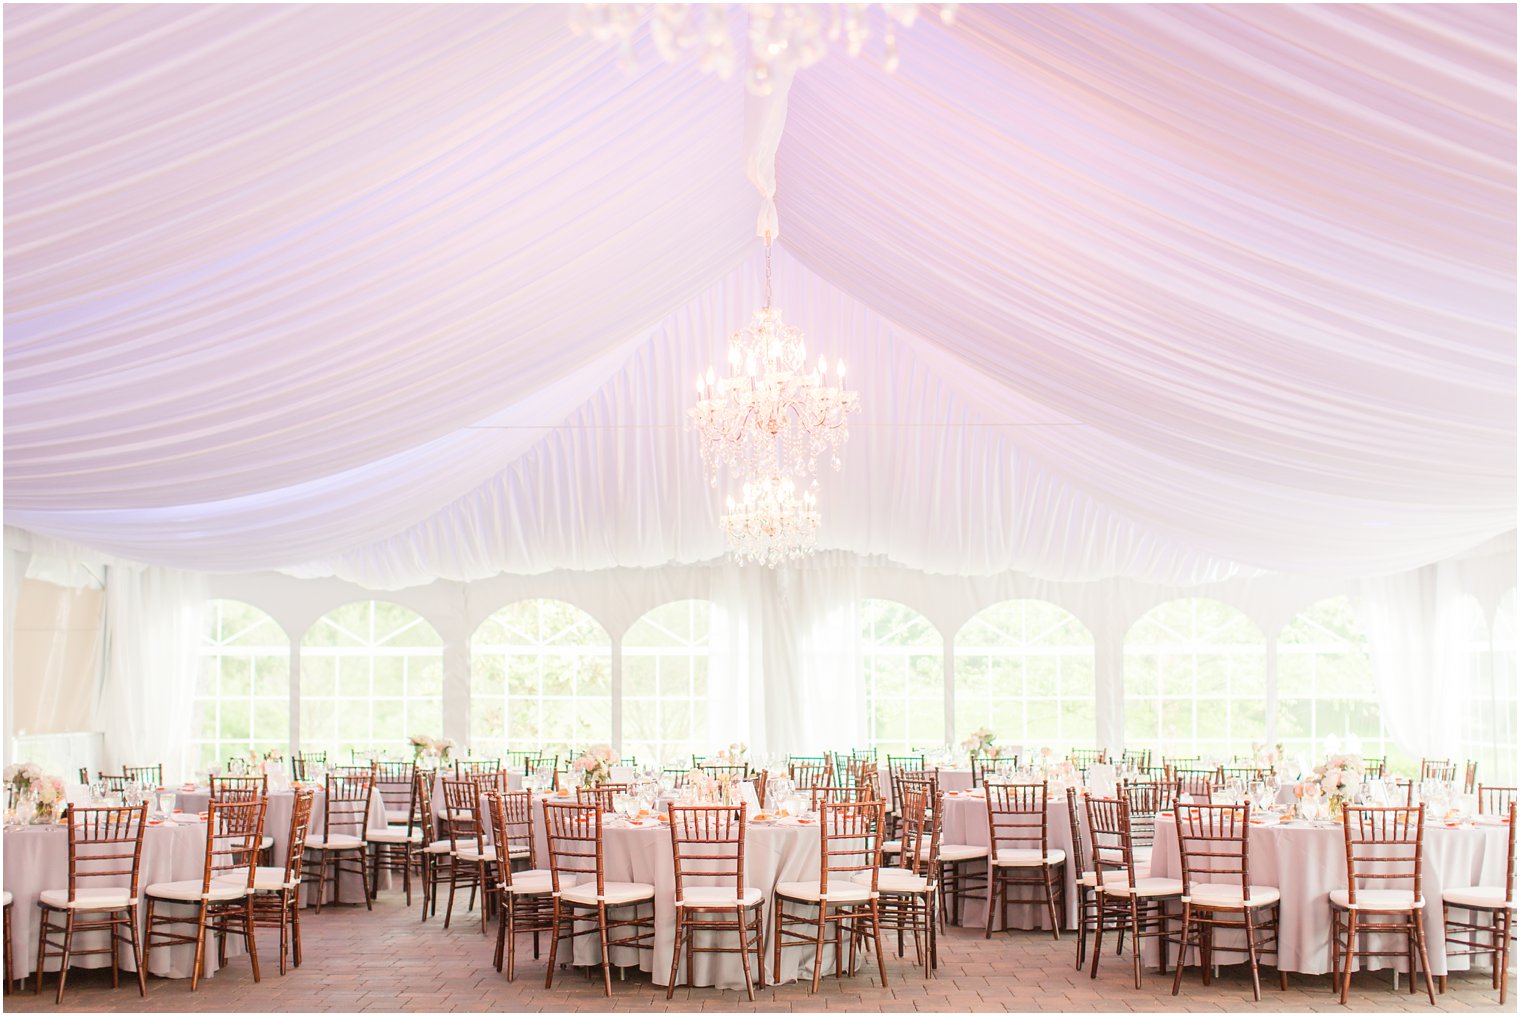 Tented reception at Windows on the Water at Frogbridge | Photos by Idalia Photography